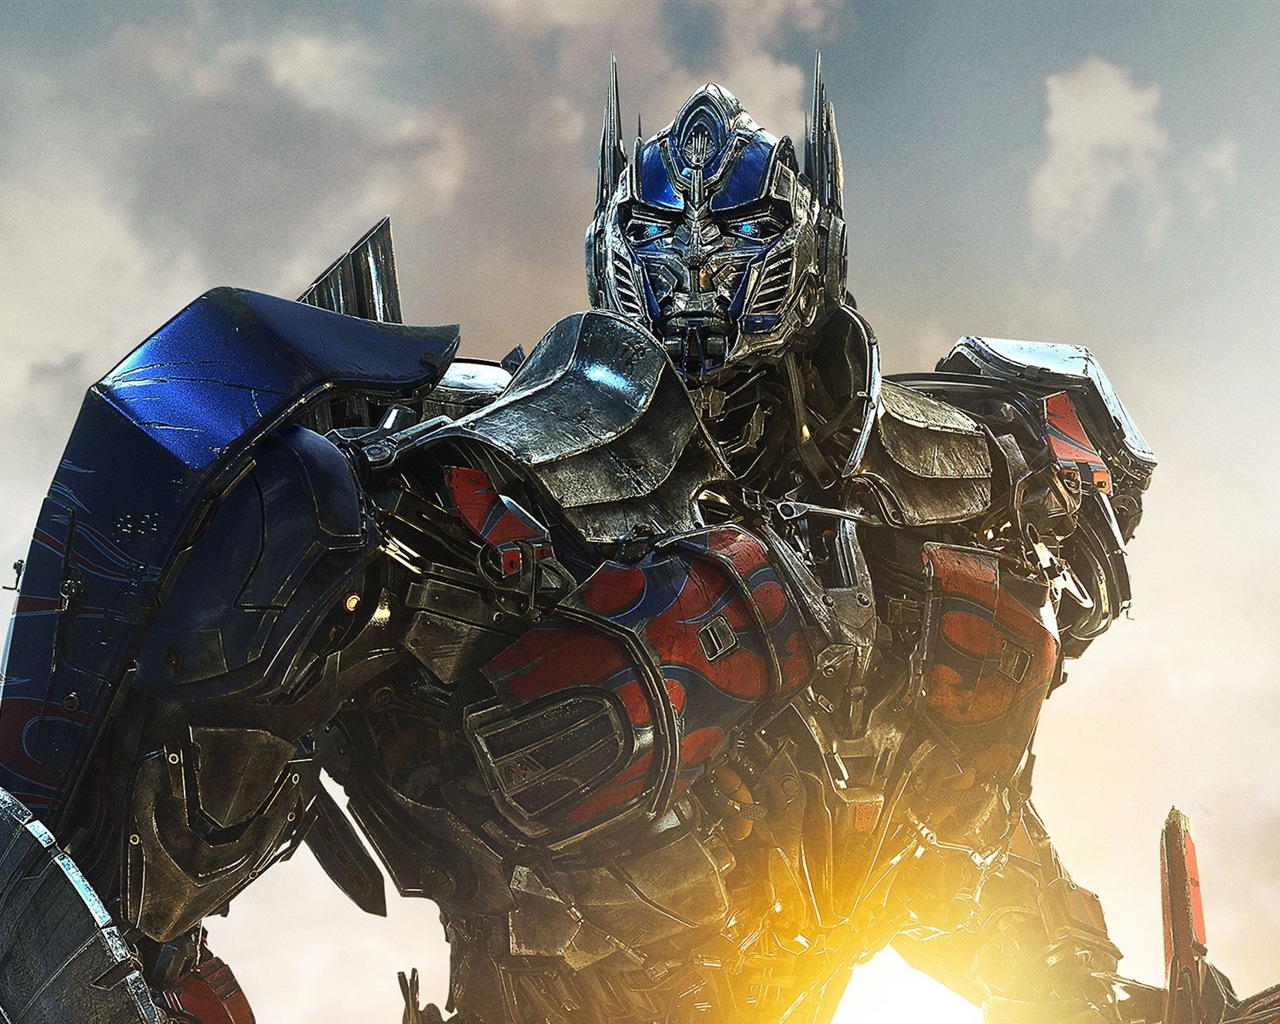 2014 Transformers: Age of Extinction HD tapety #2 - 1280x1024